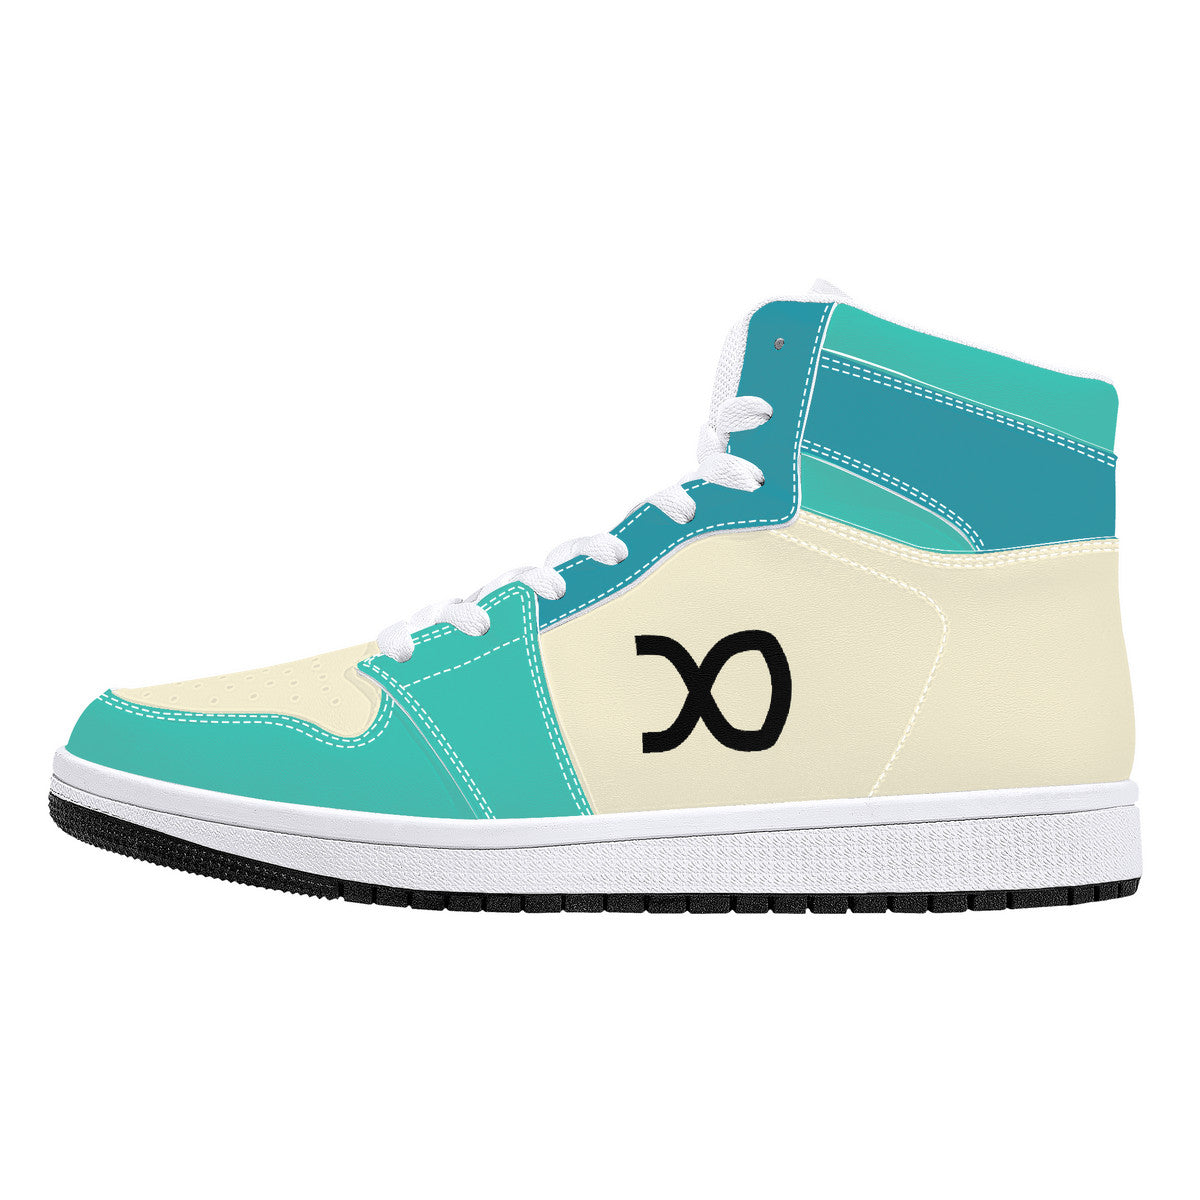 Cool shoes by Alex H | High Top Customized | Shoe Zero